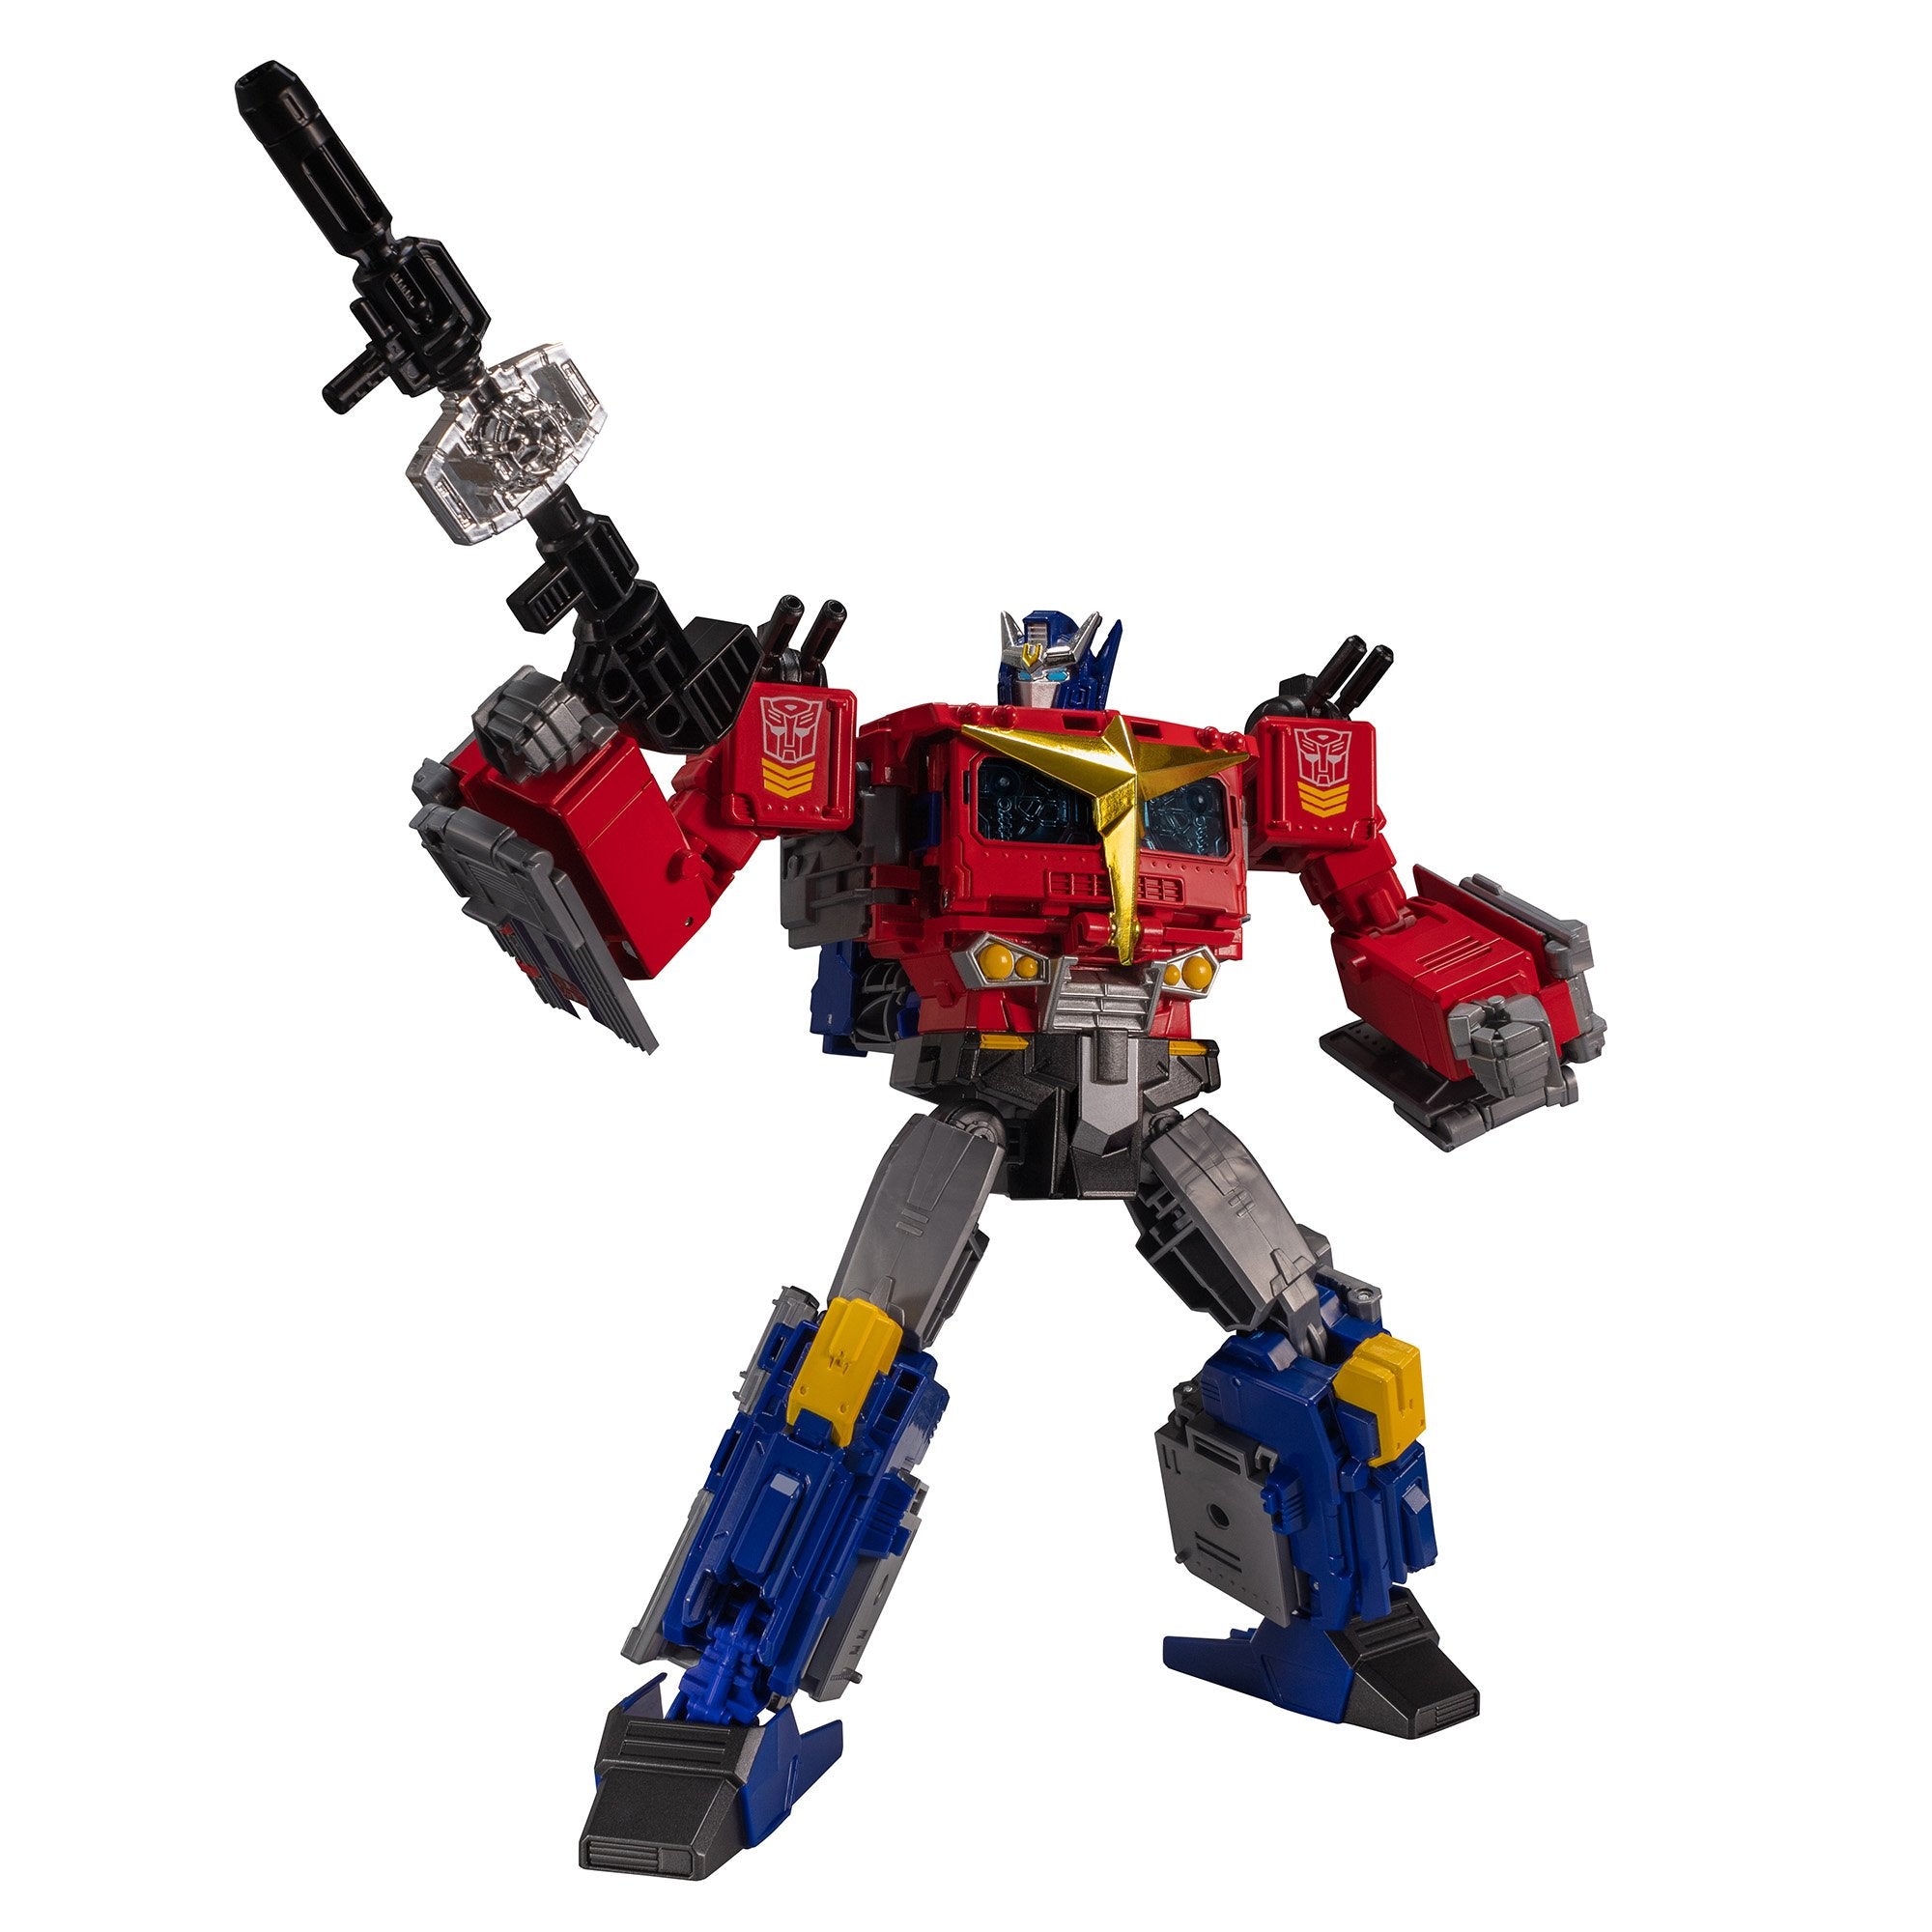 Hasbro - Transformers Generations Selects - Leader - Star Convoy (Optimus Prime) (TakaraTomy Mall Exclusive) - Marvelous Toys